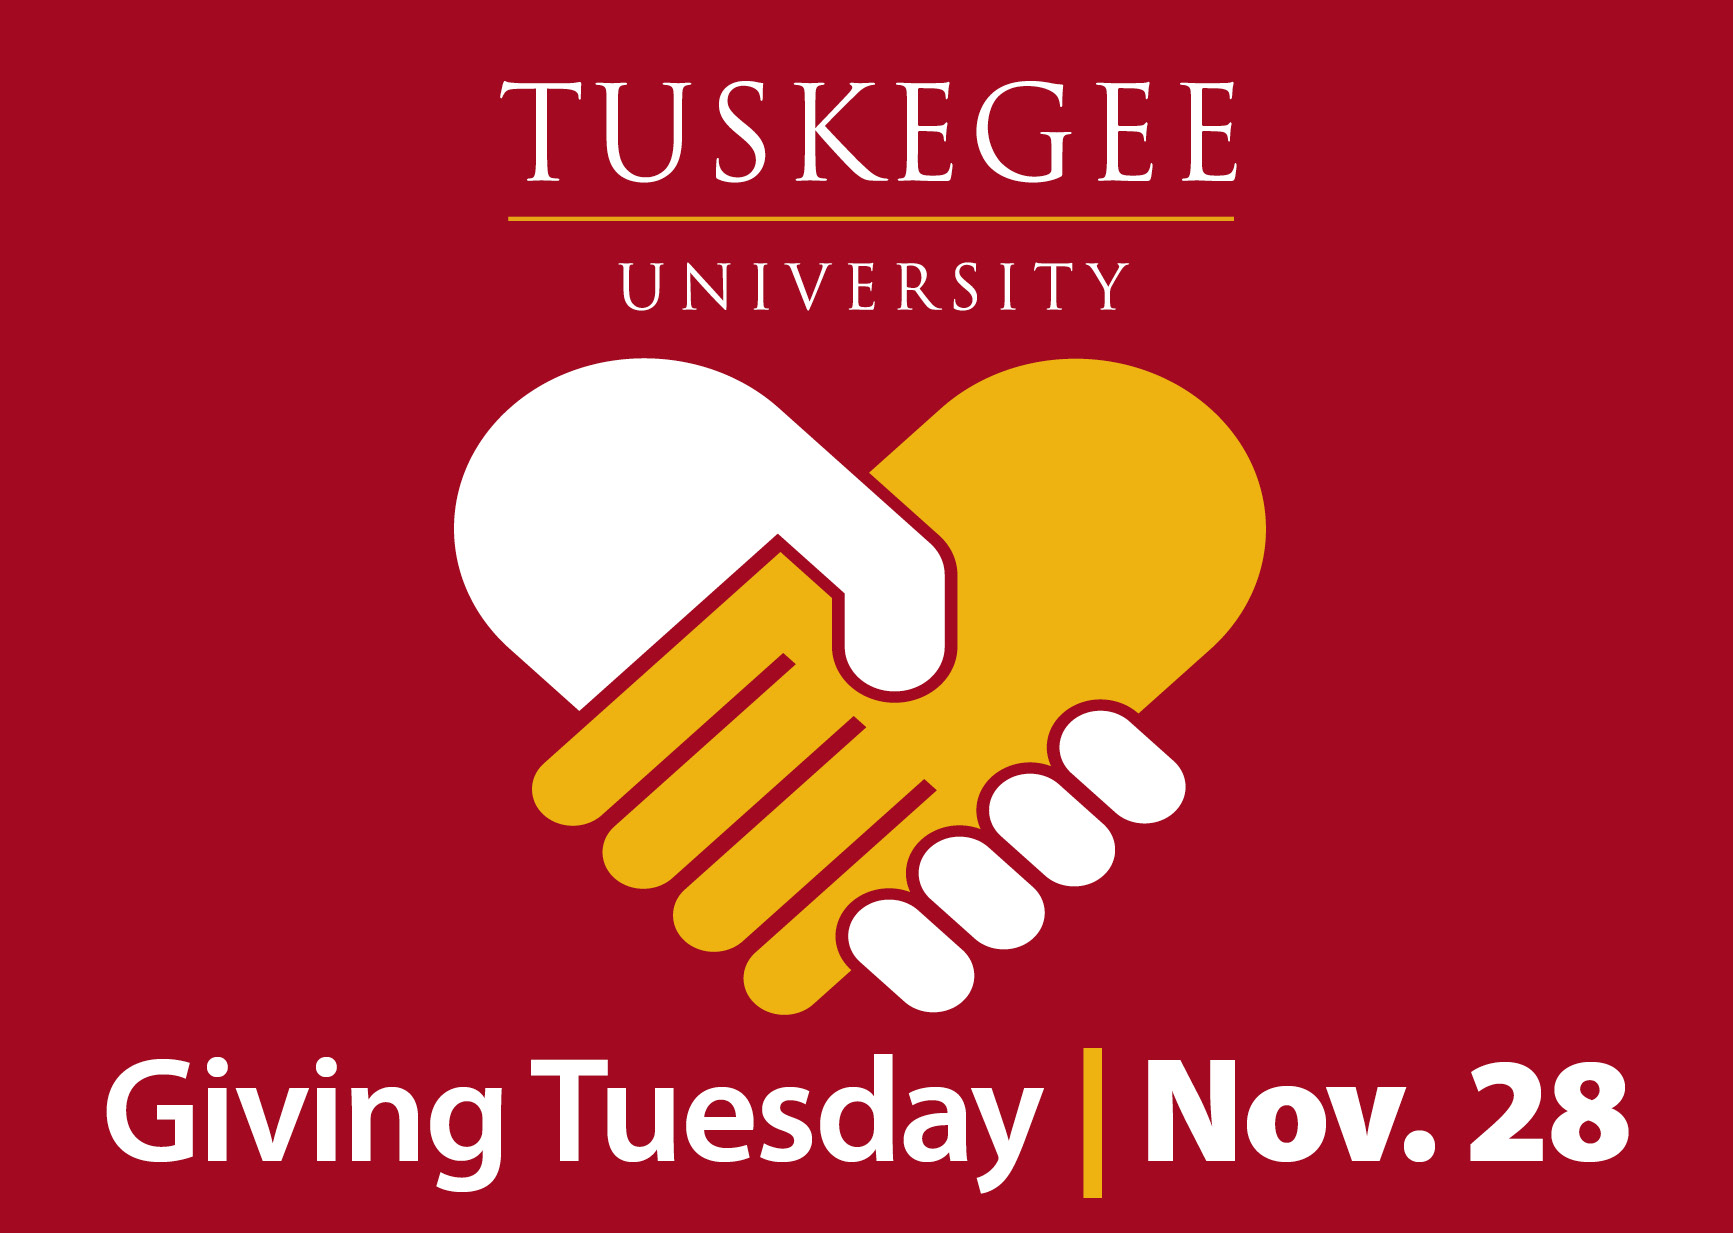 Tuskegee University Invites Alumni, Friends, and Supporters to Join Giving Tuesday